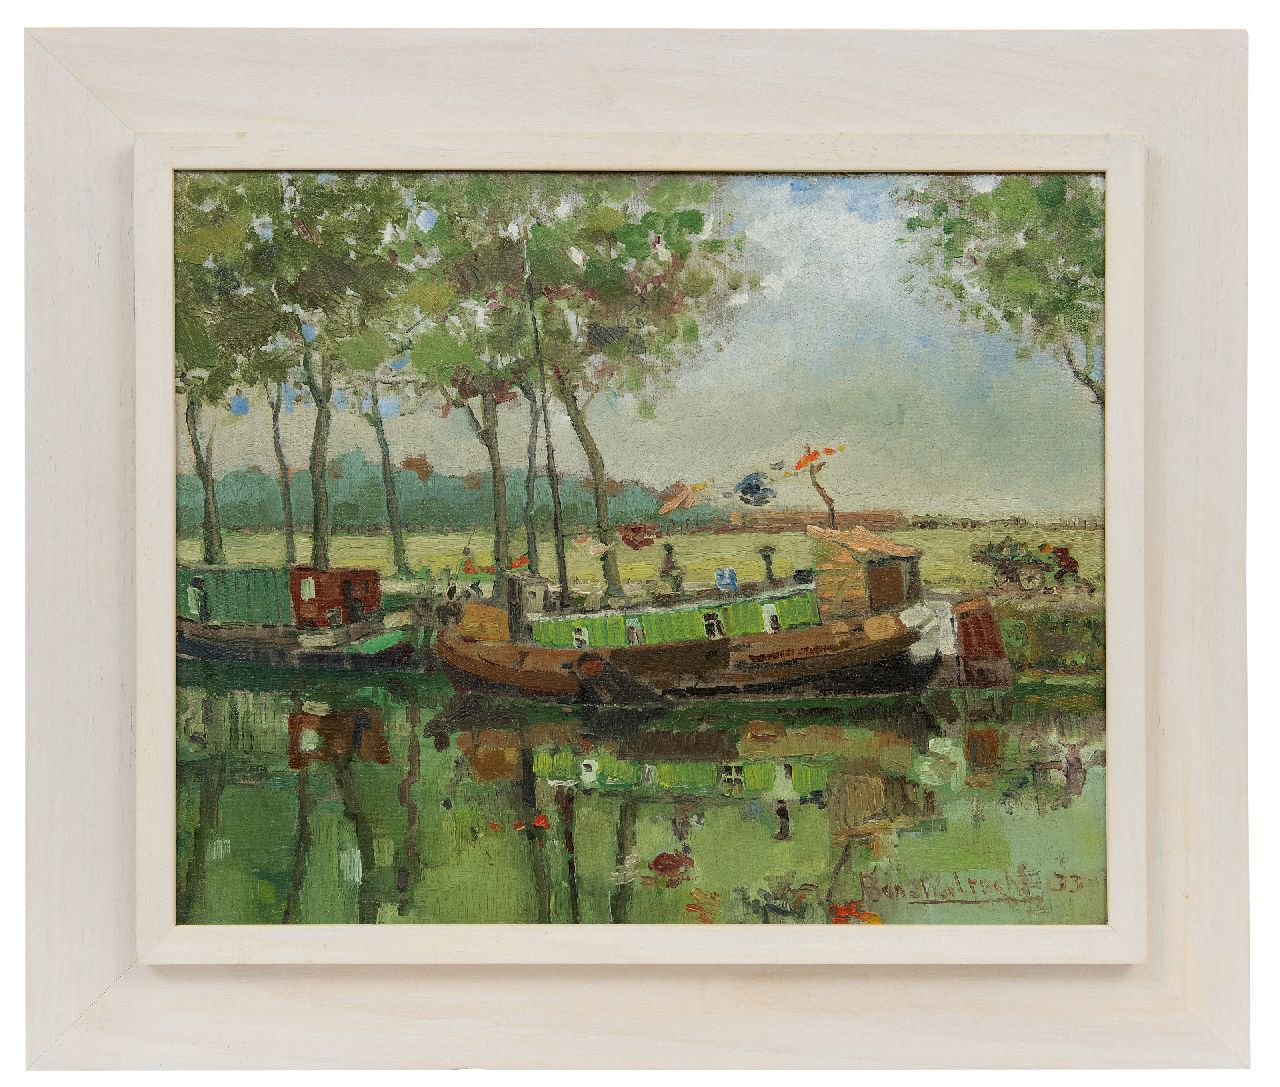 Walrecht B.H.D.  | Bernardus Hermannus David 'Ben' Walrecht | Paintings offered for sale | At Oldehove, oil on canvas laid down on panel 40.4 x 50.0 cm, signed l.r. and dated '33